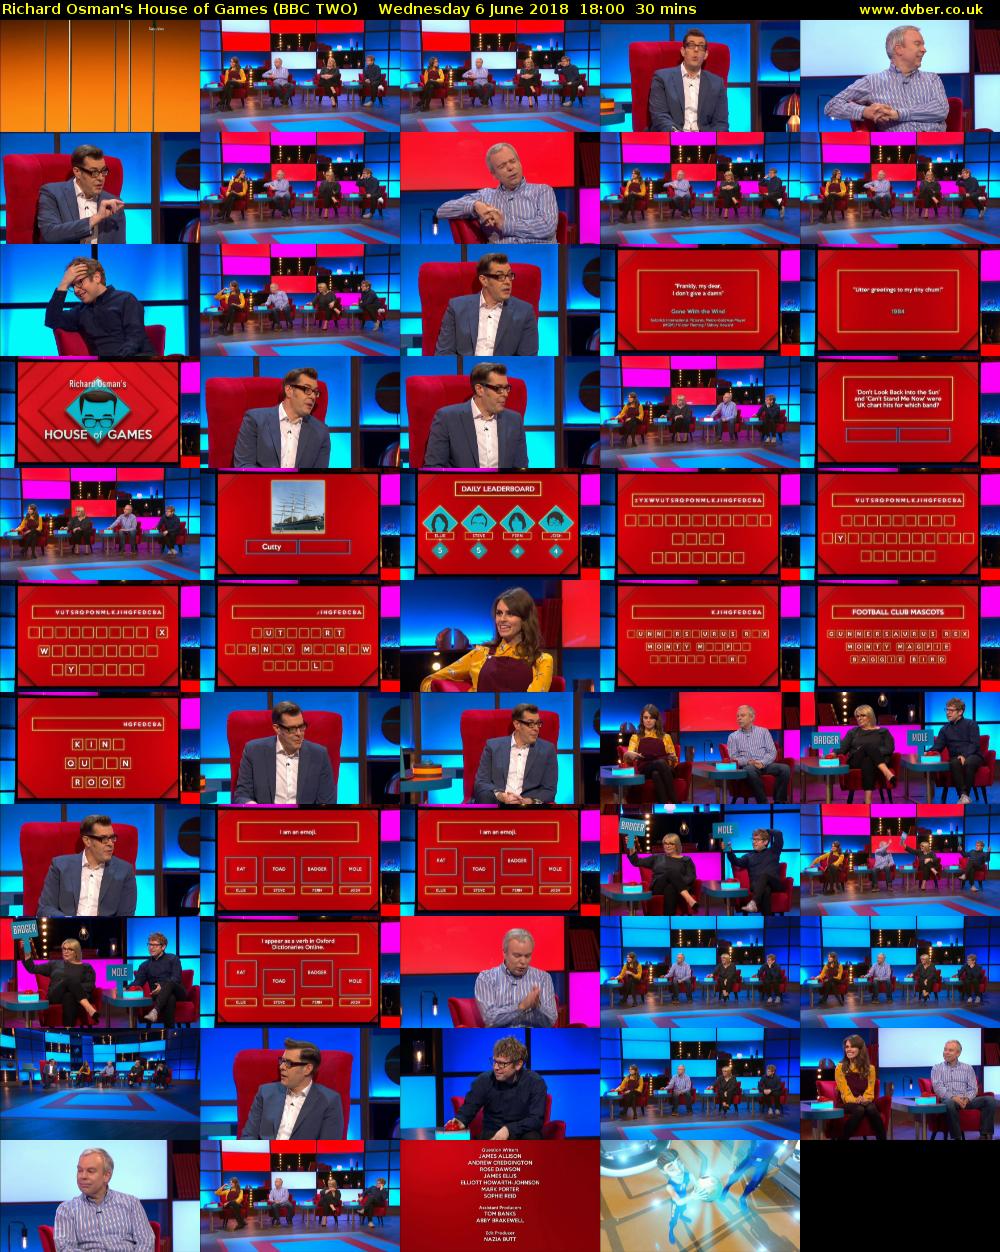 Richard Osman's House of Games (BBC TWO) Wednesday 6 June 2018 18:00 - 18:30